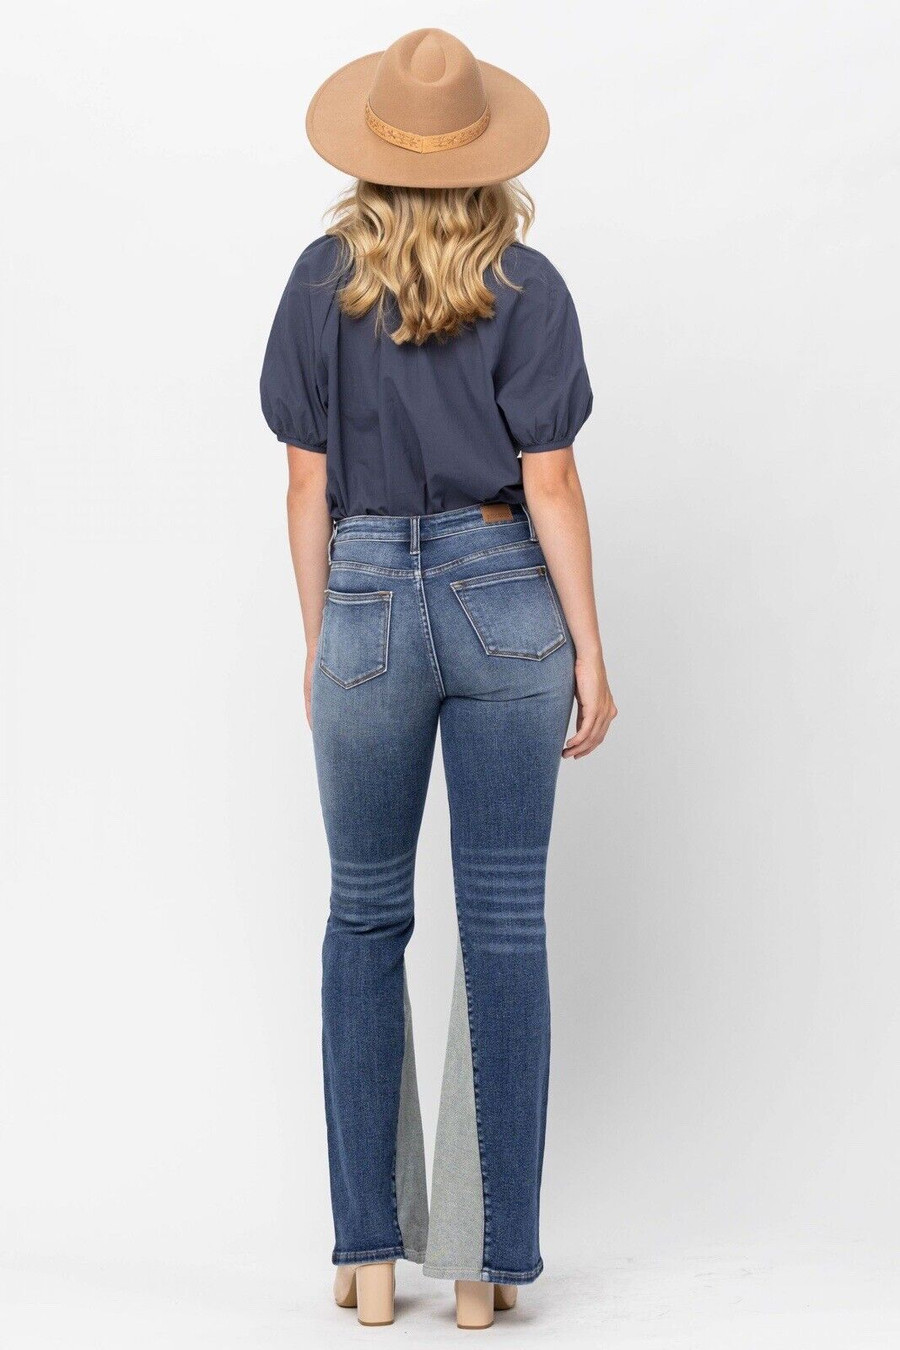 Judy Blue - Women's Mid Rise Inseam Panel Flare Jeans